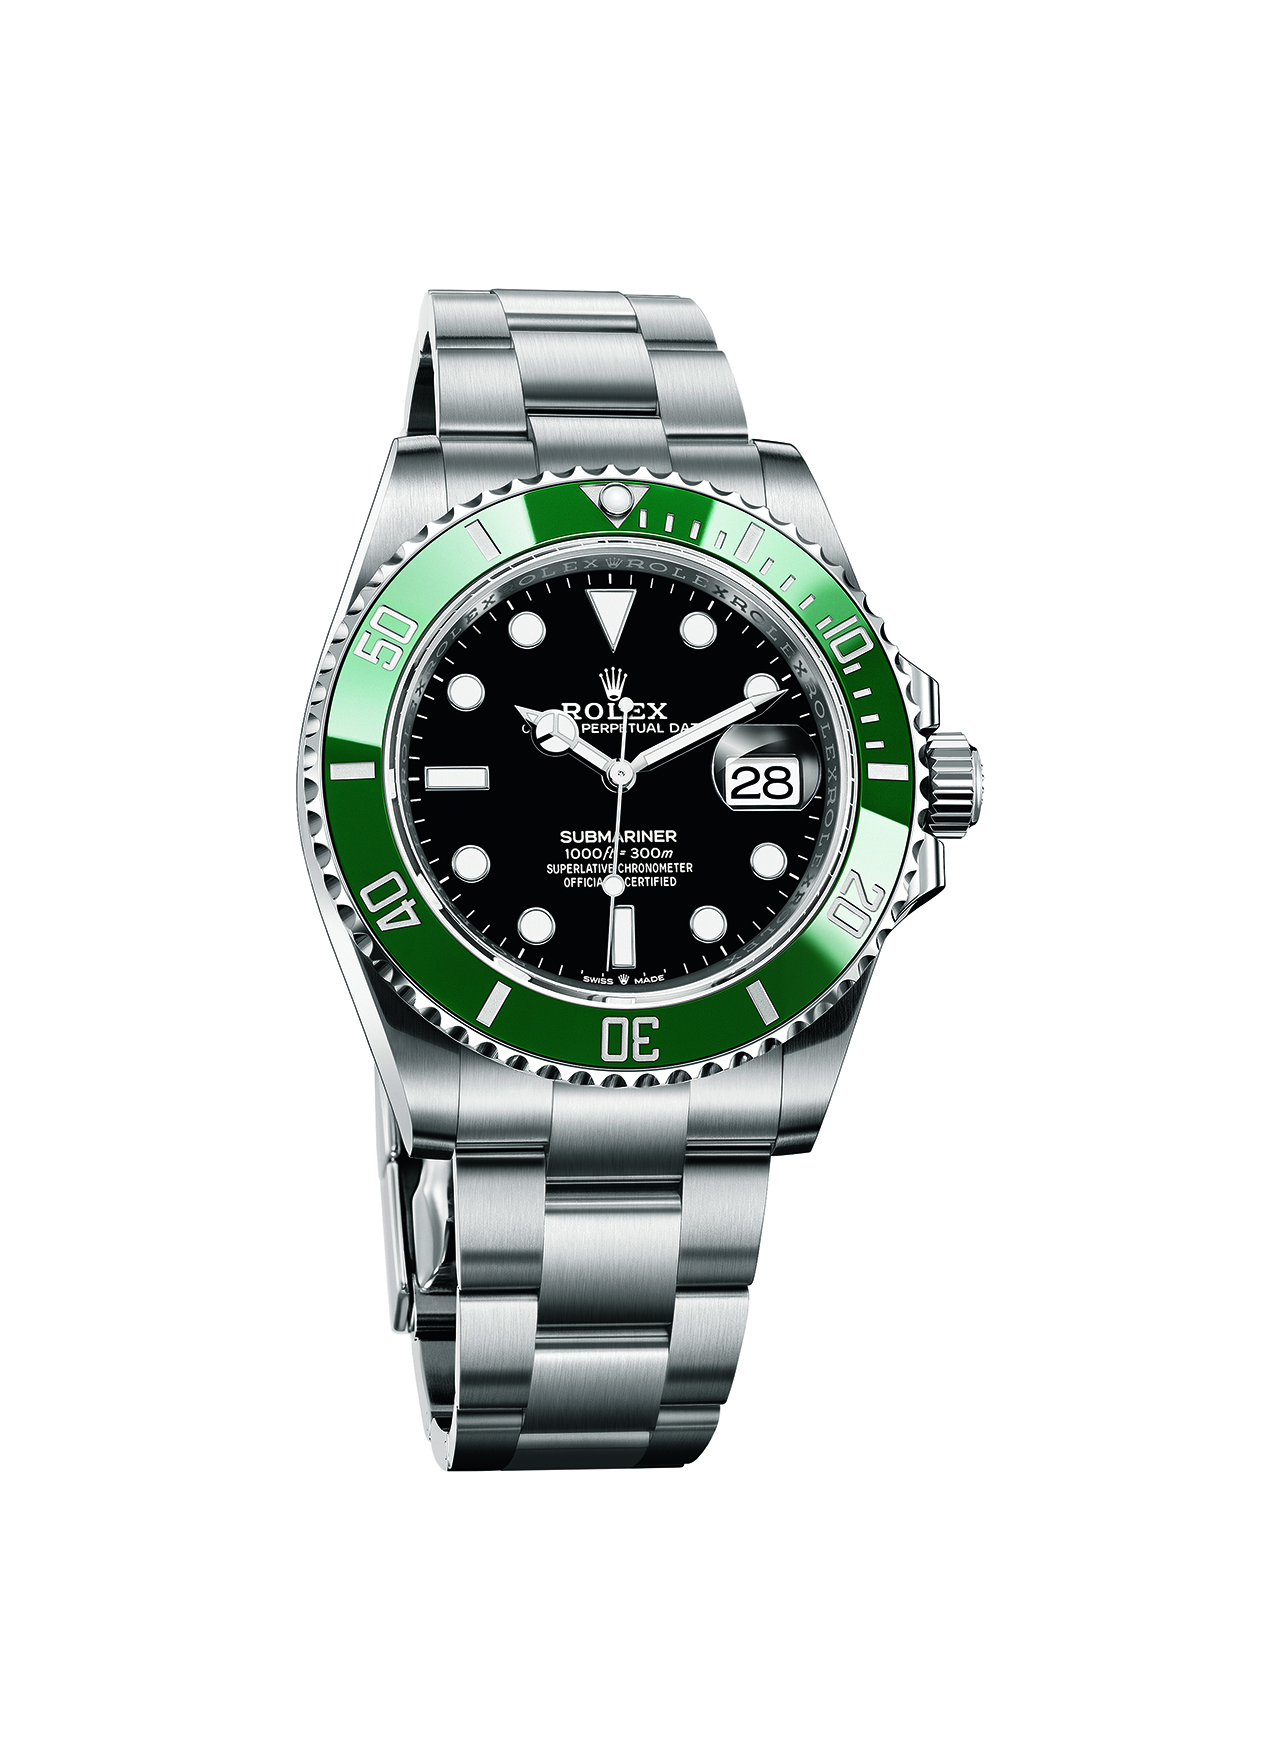 Rolex Oyster Perpetual Submariner Date Referenciaszáma: 126610LV. Forrás: Rolex 